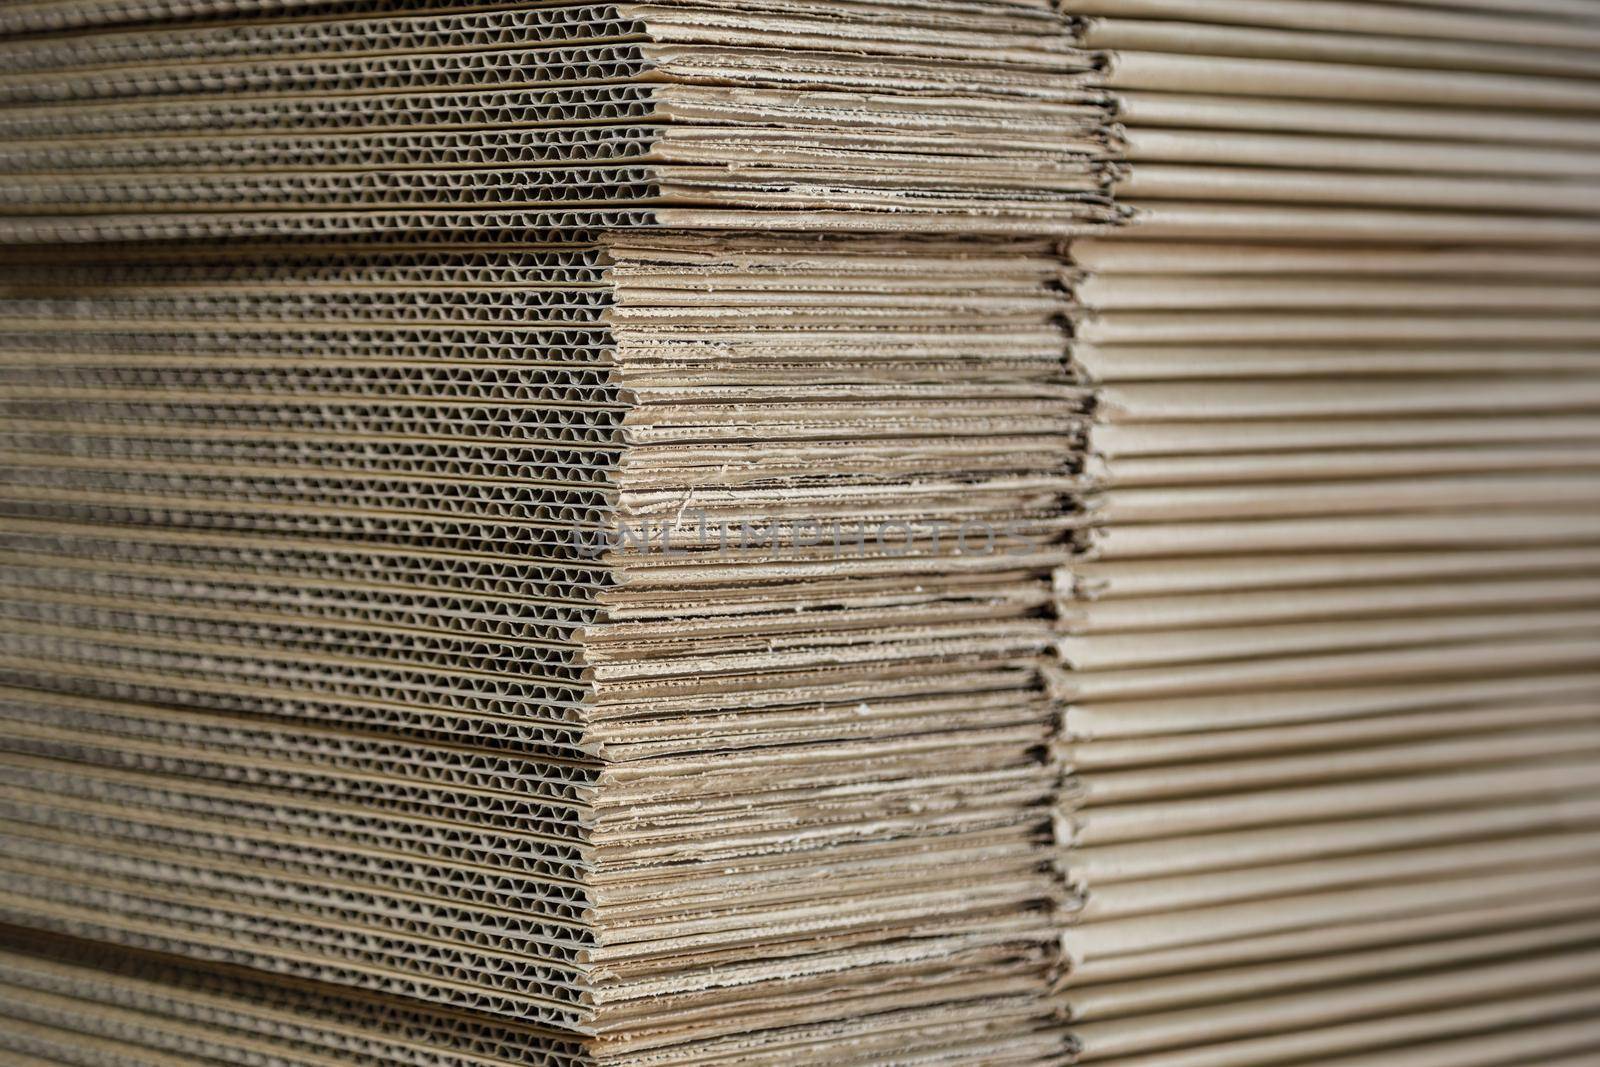 Texture of many cardboard boxes for recycling or packaging